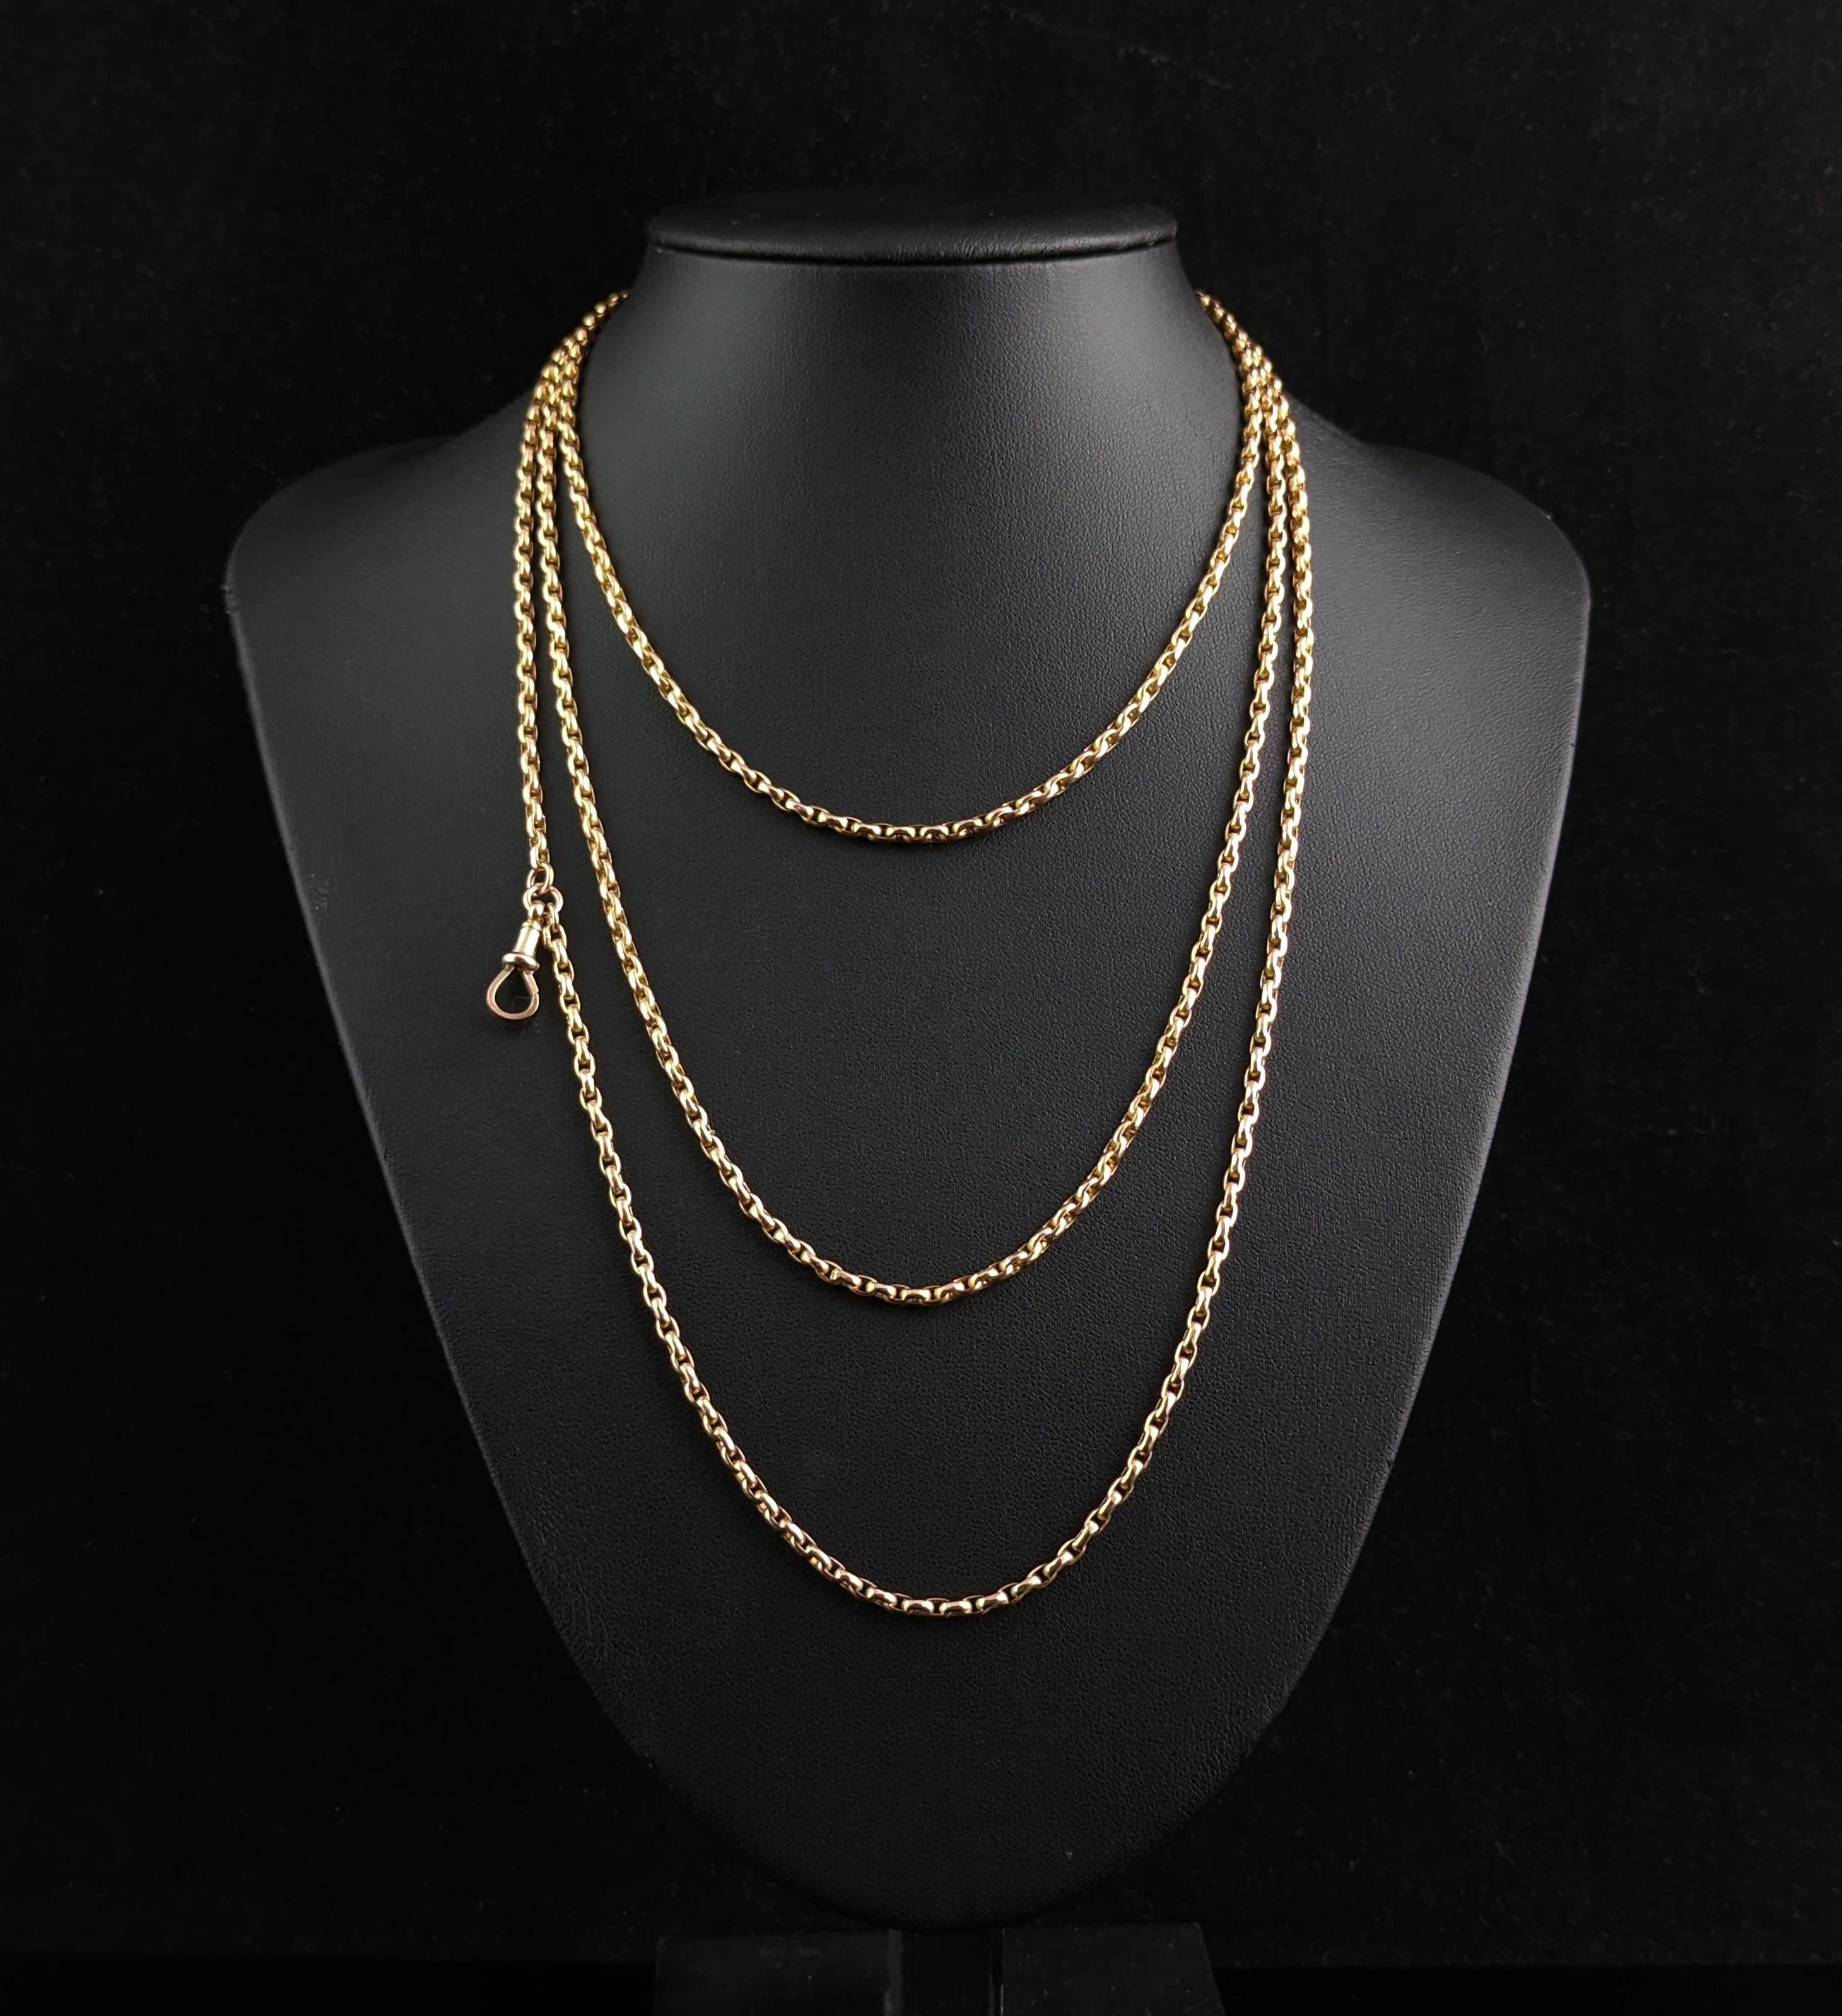 Antique 9k Yellow Gold Long Chain Necklace, Longuard, Victorian For Sale 4